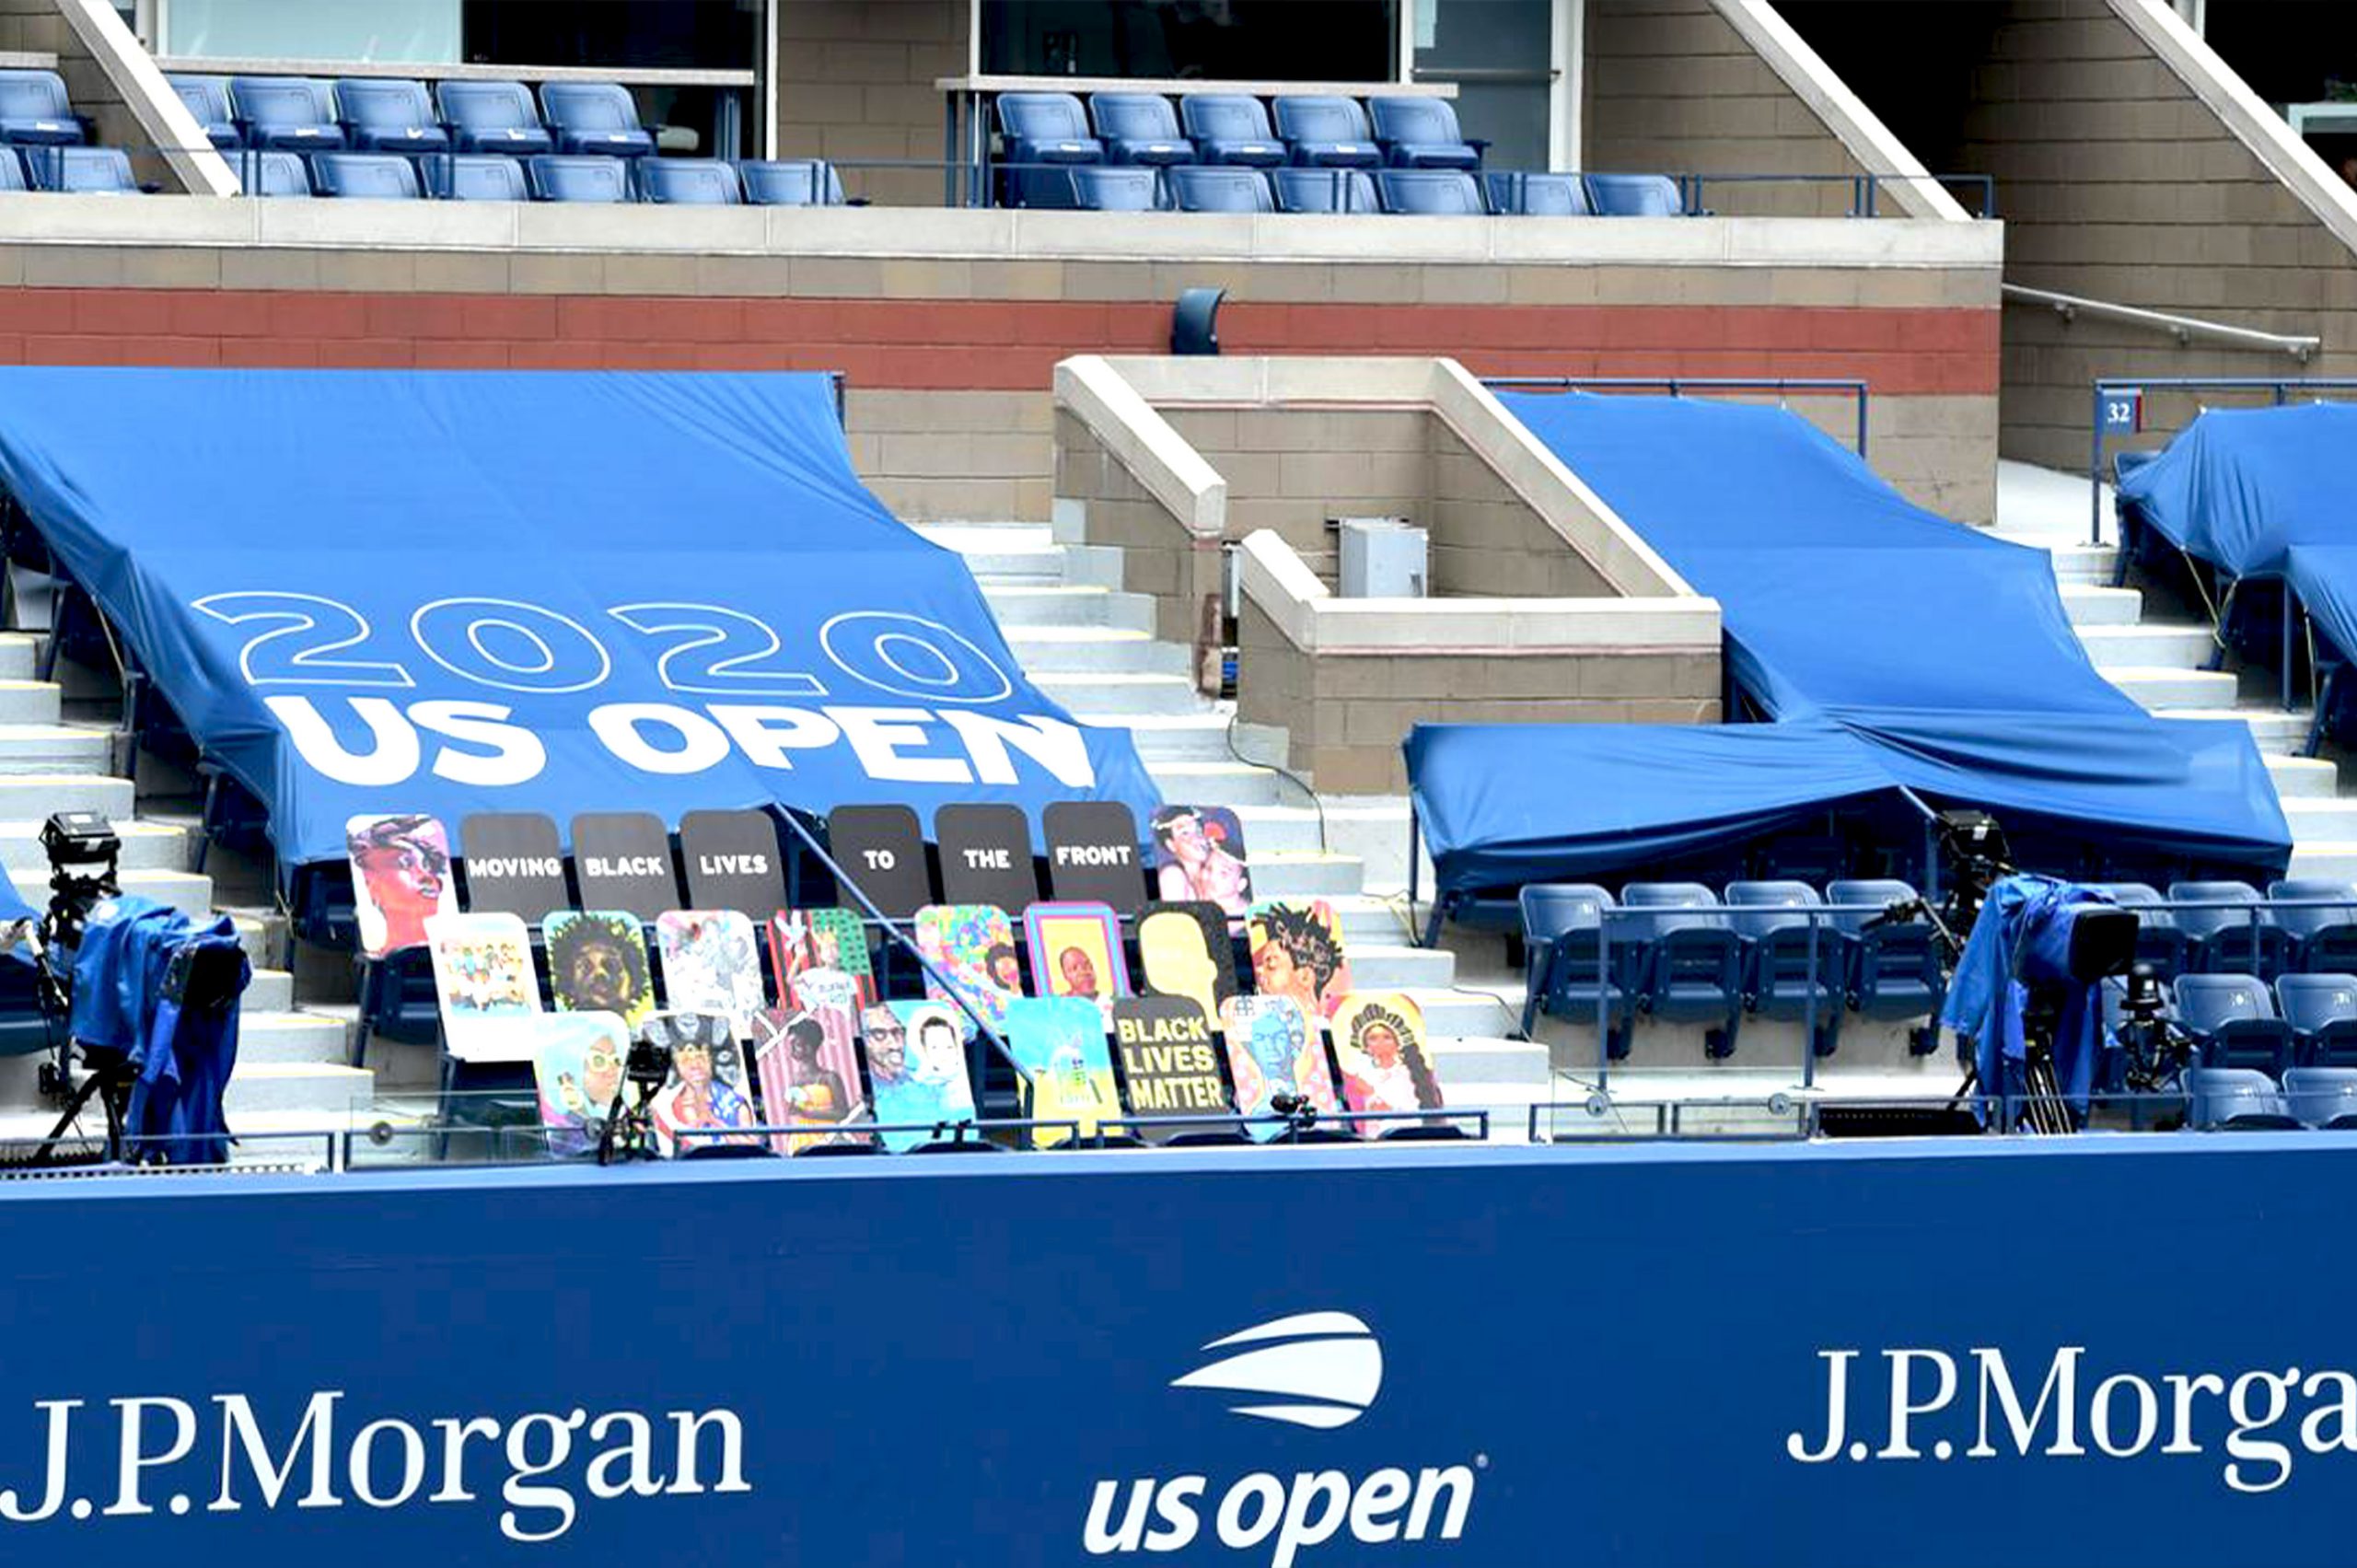 event graphics - US open visuals and fabrication